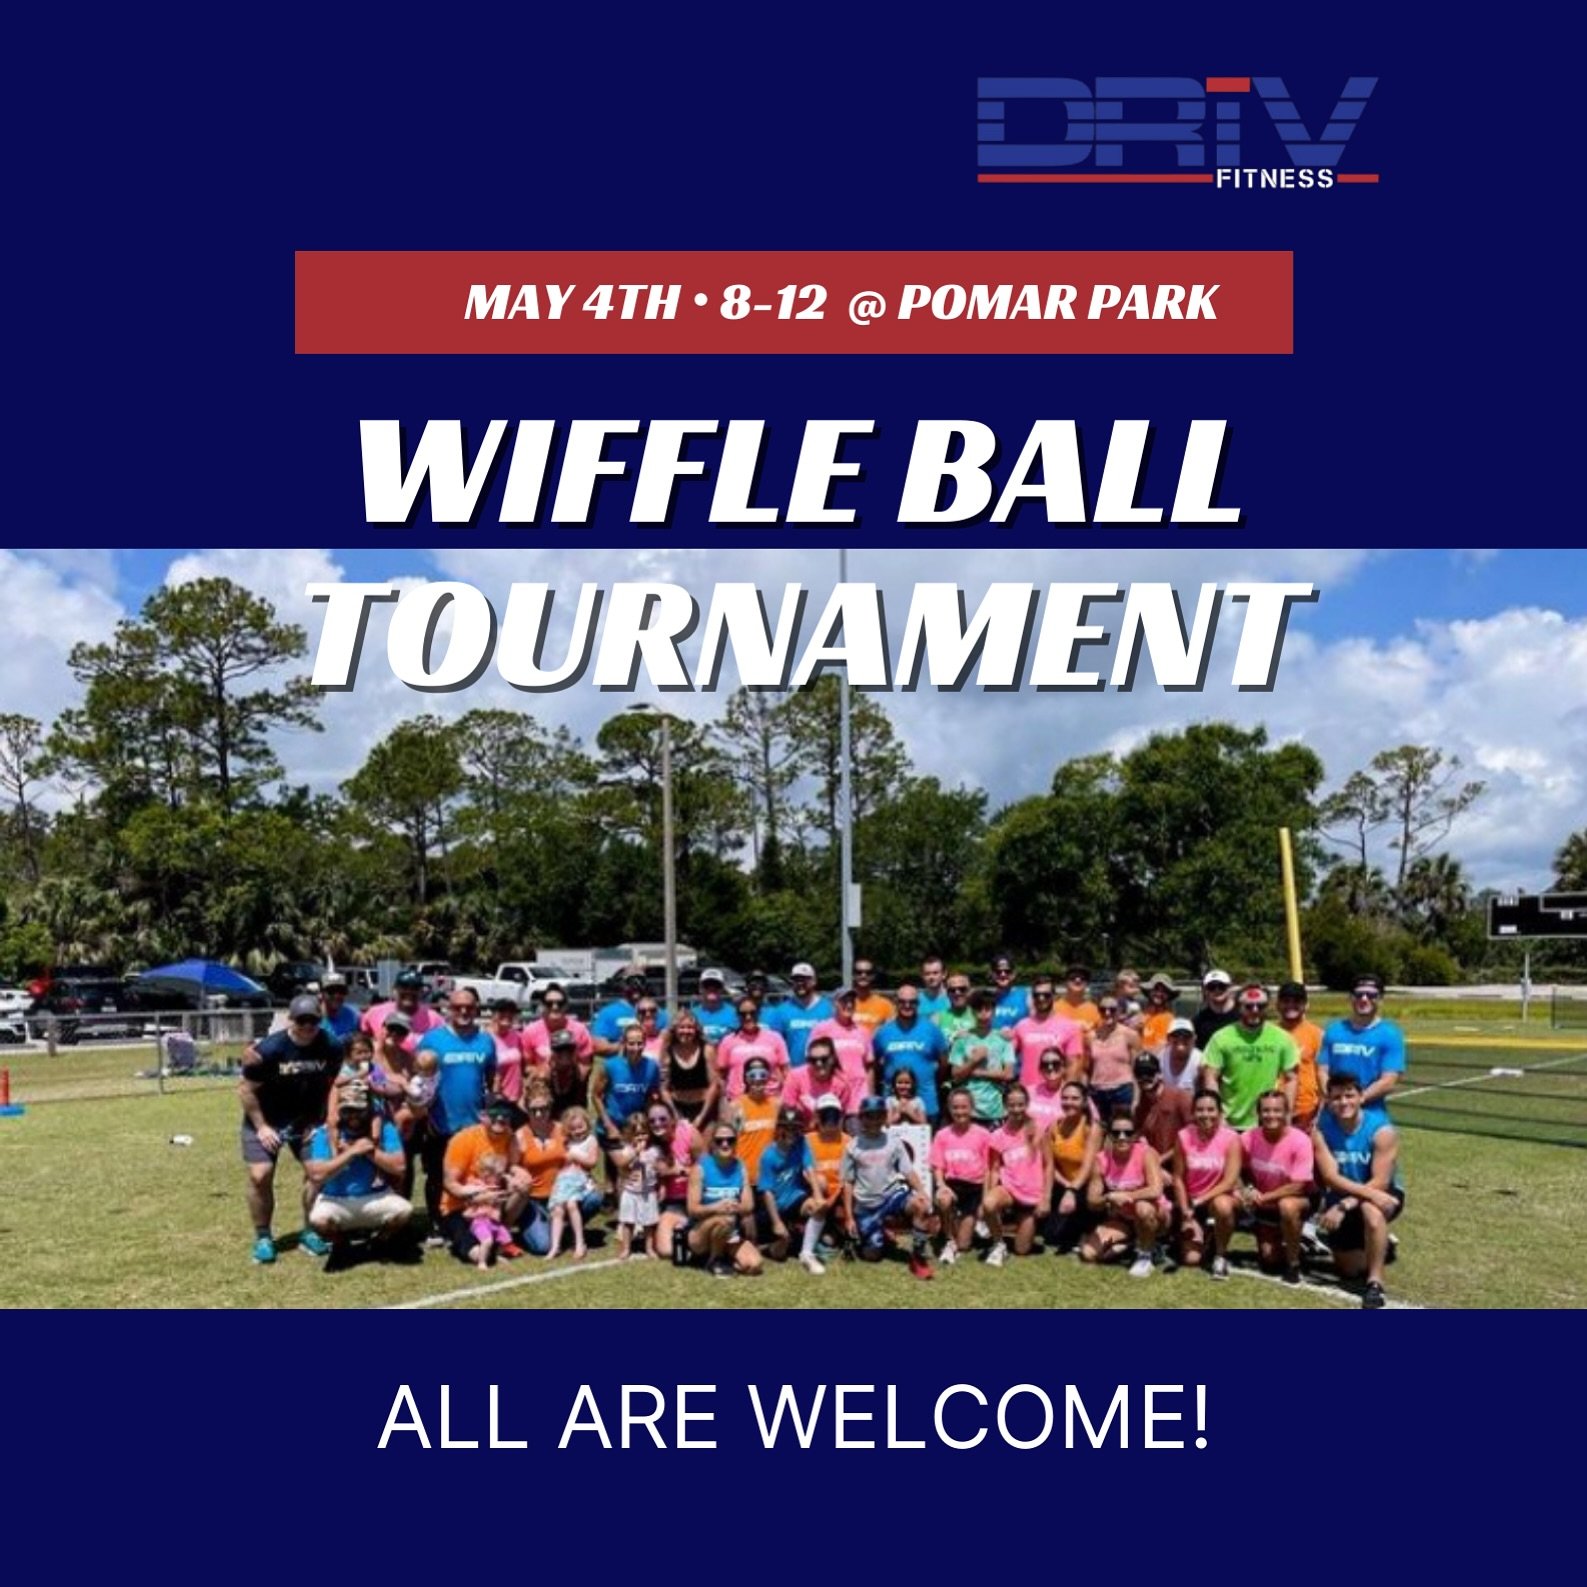 As if the week couldn&rsquo;t get any better we&rsquo;re gonna have our annual wiffle ball tournament this Saturday at Pomar Park from 8-12.

Teams will be picked onsite unless you&rsquo;ve created one. 

All are welcome!